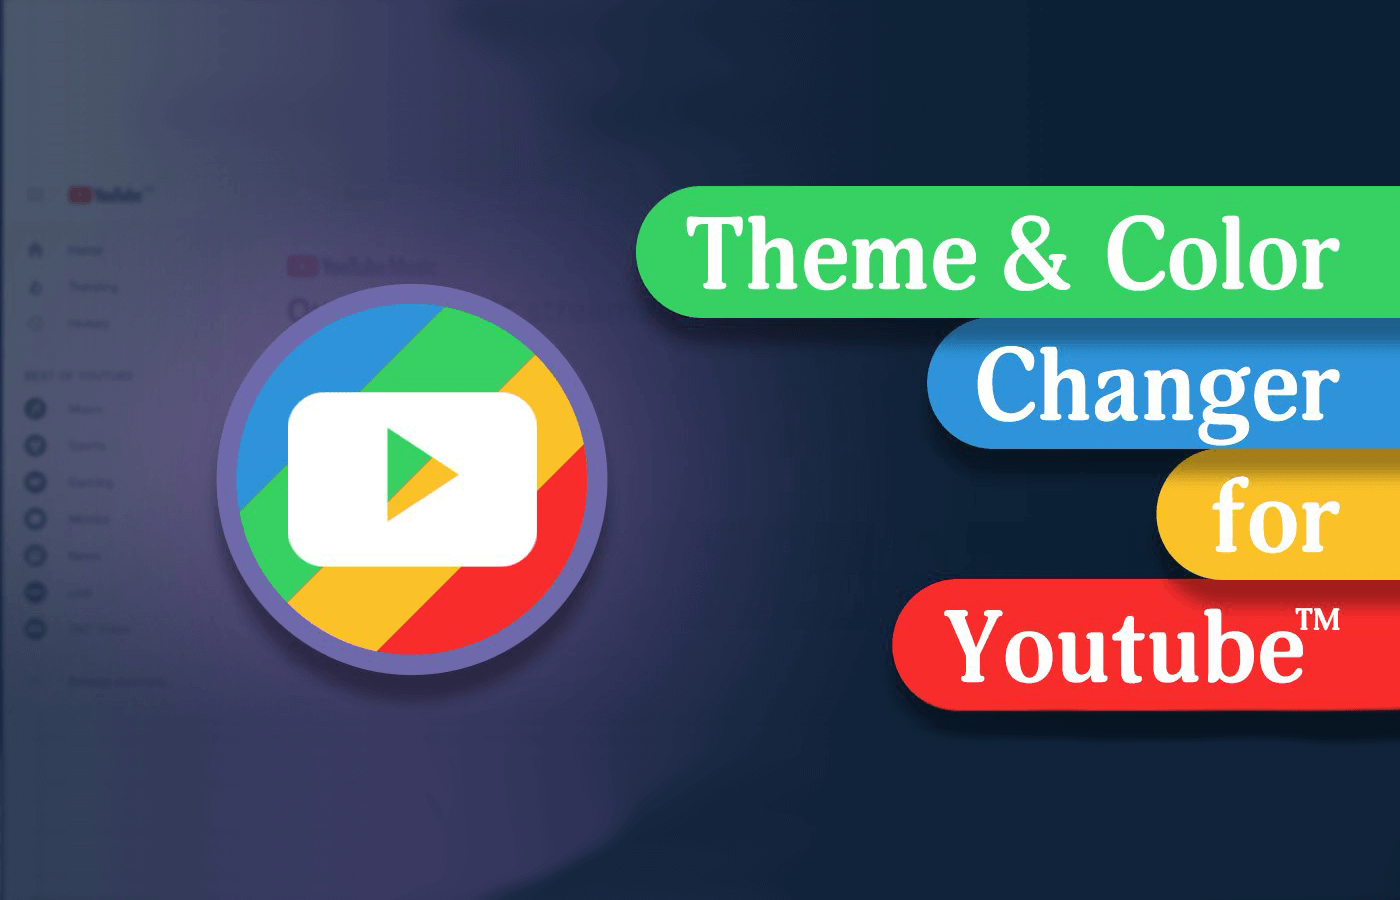 Theme & Color Changer for Youtube™ Extension